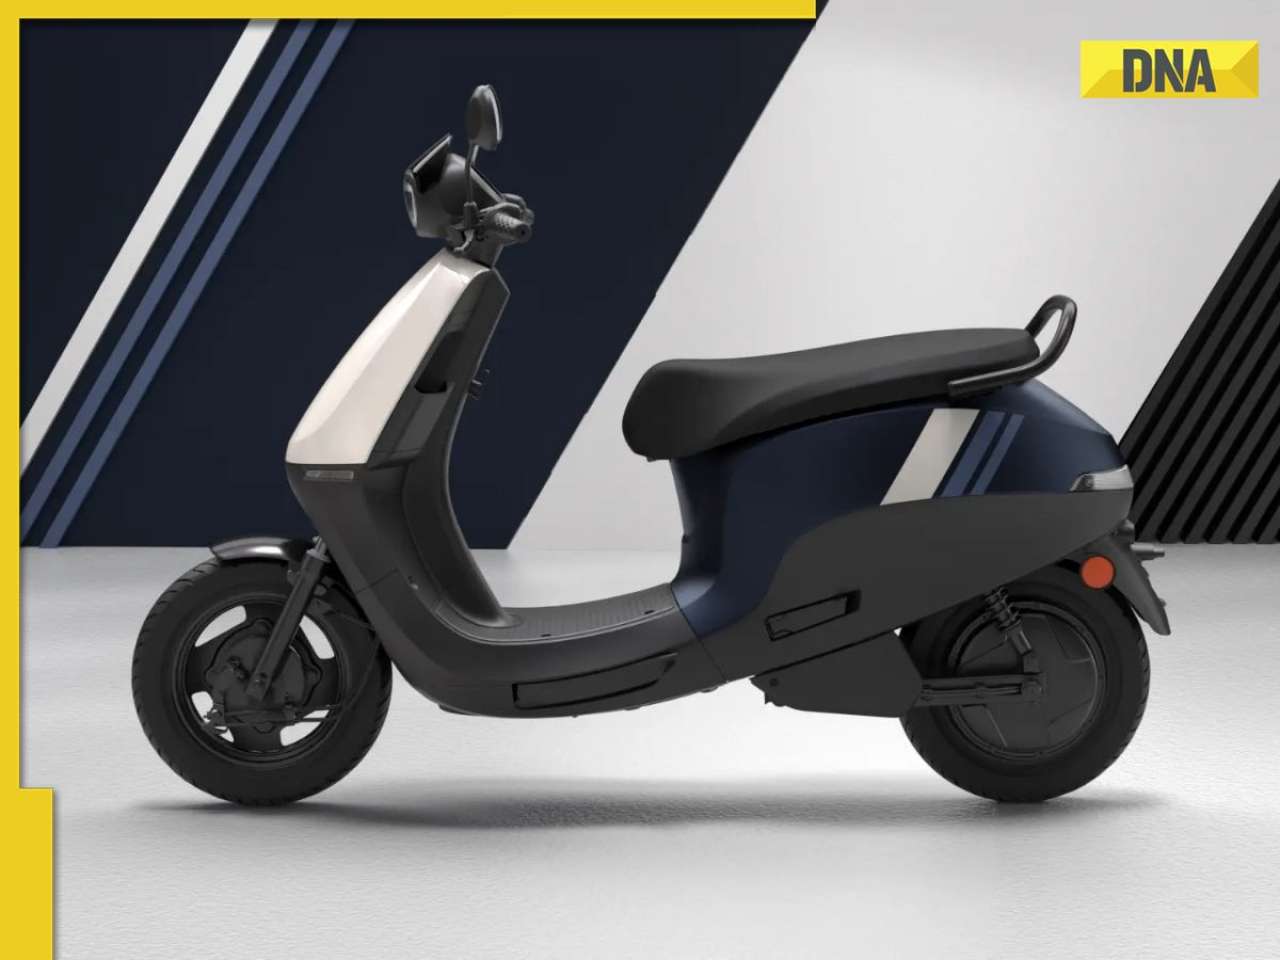 Ola’s S1 Pro electric scooter gets PLI certification to boost green mobility